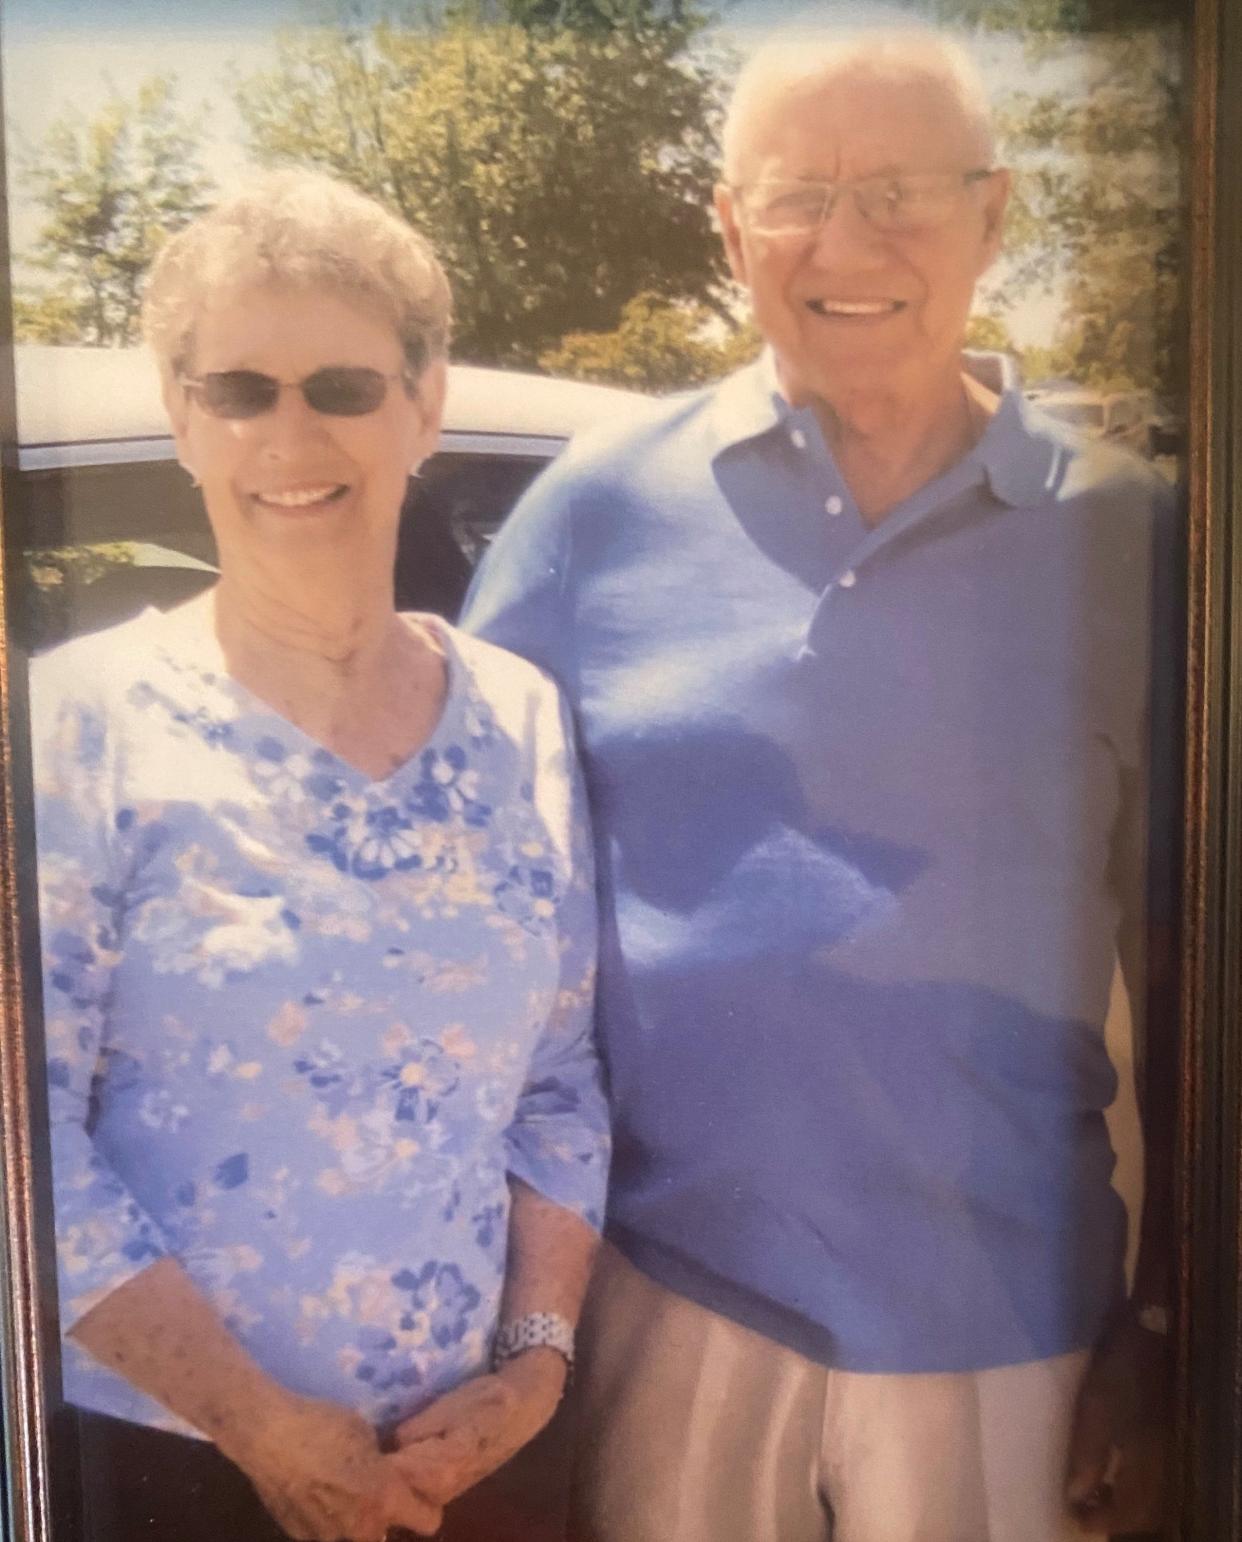 Kay Andrews, pictured with her husband, Harry, was killed by a FedEx vehicle last week.